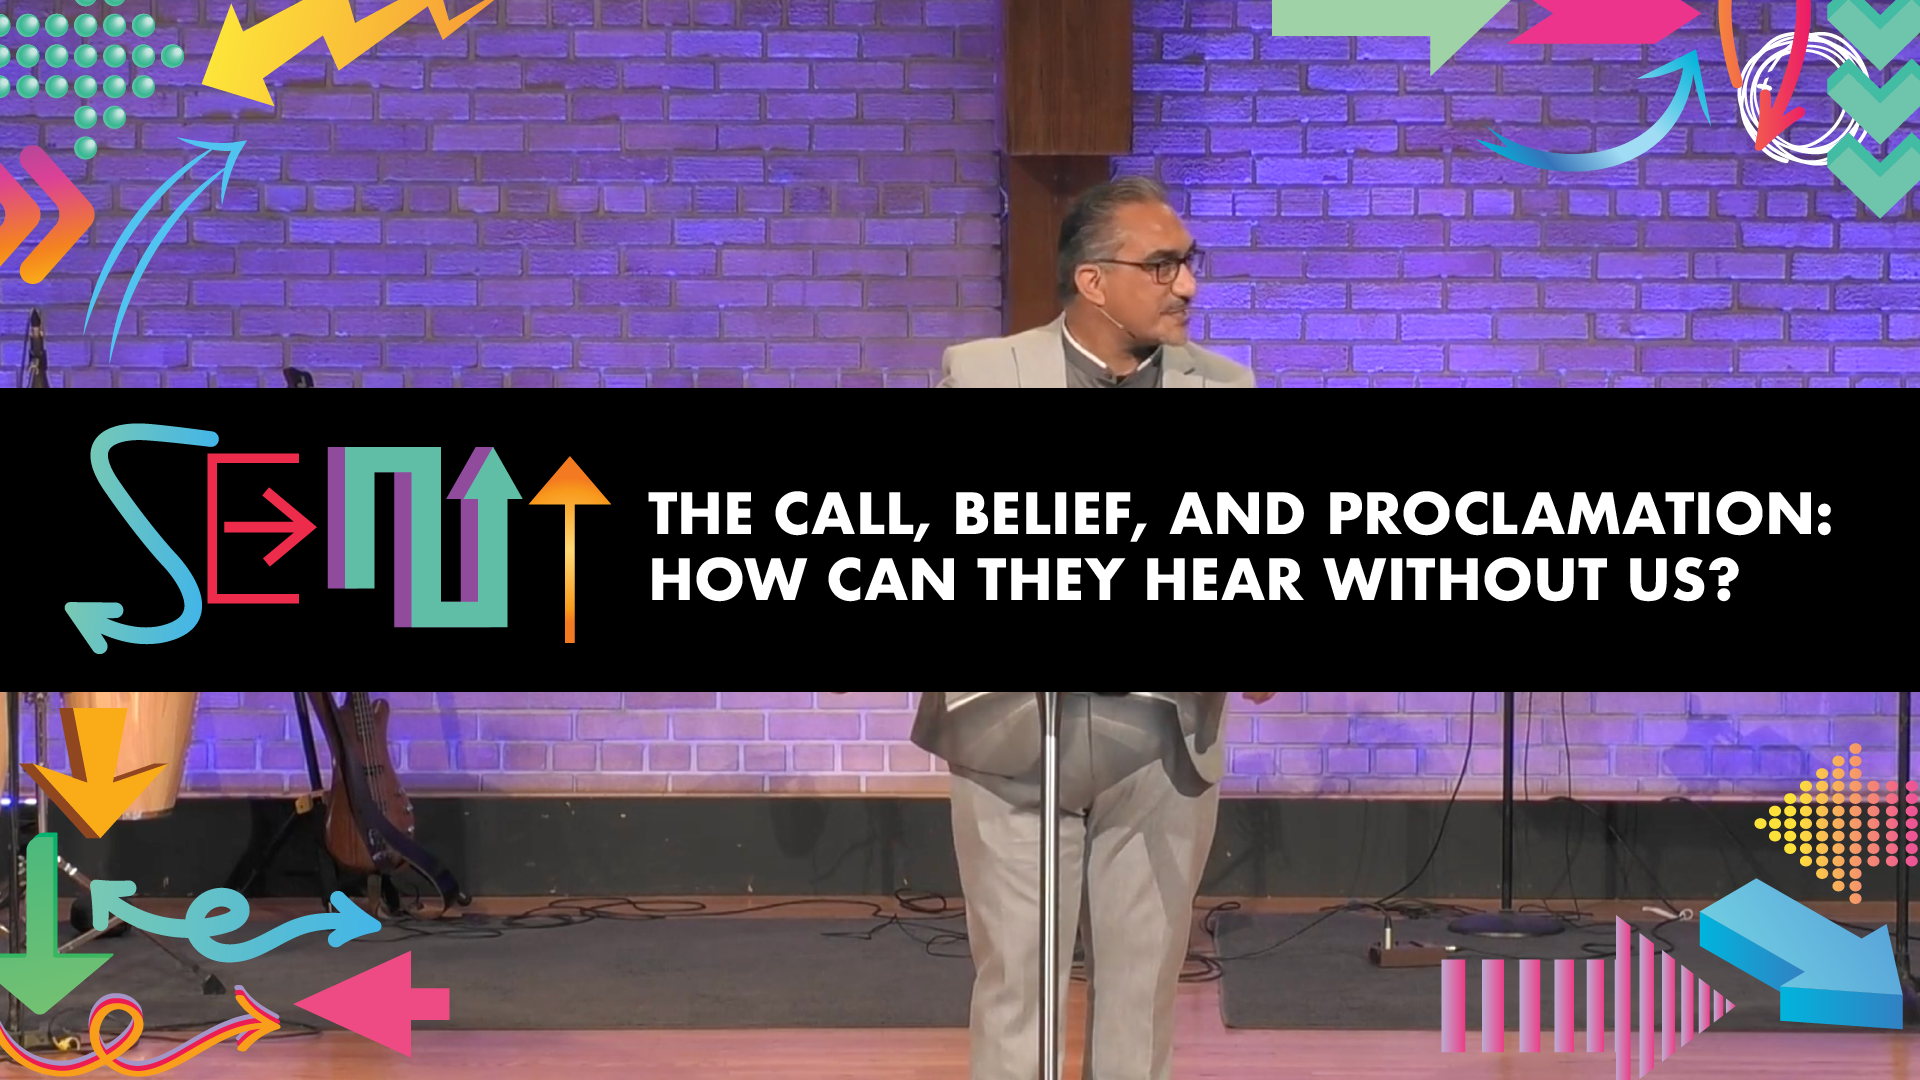 The Call, Belief, and Proclamation: How Can They Hear Without Us?